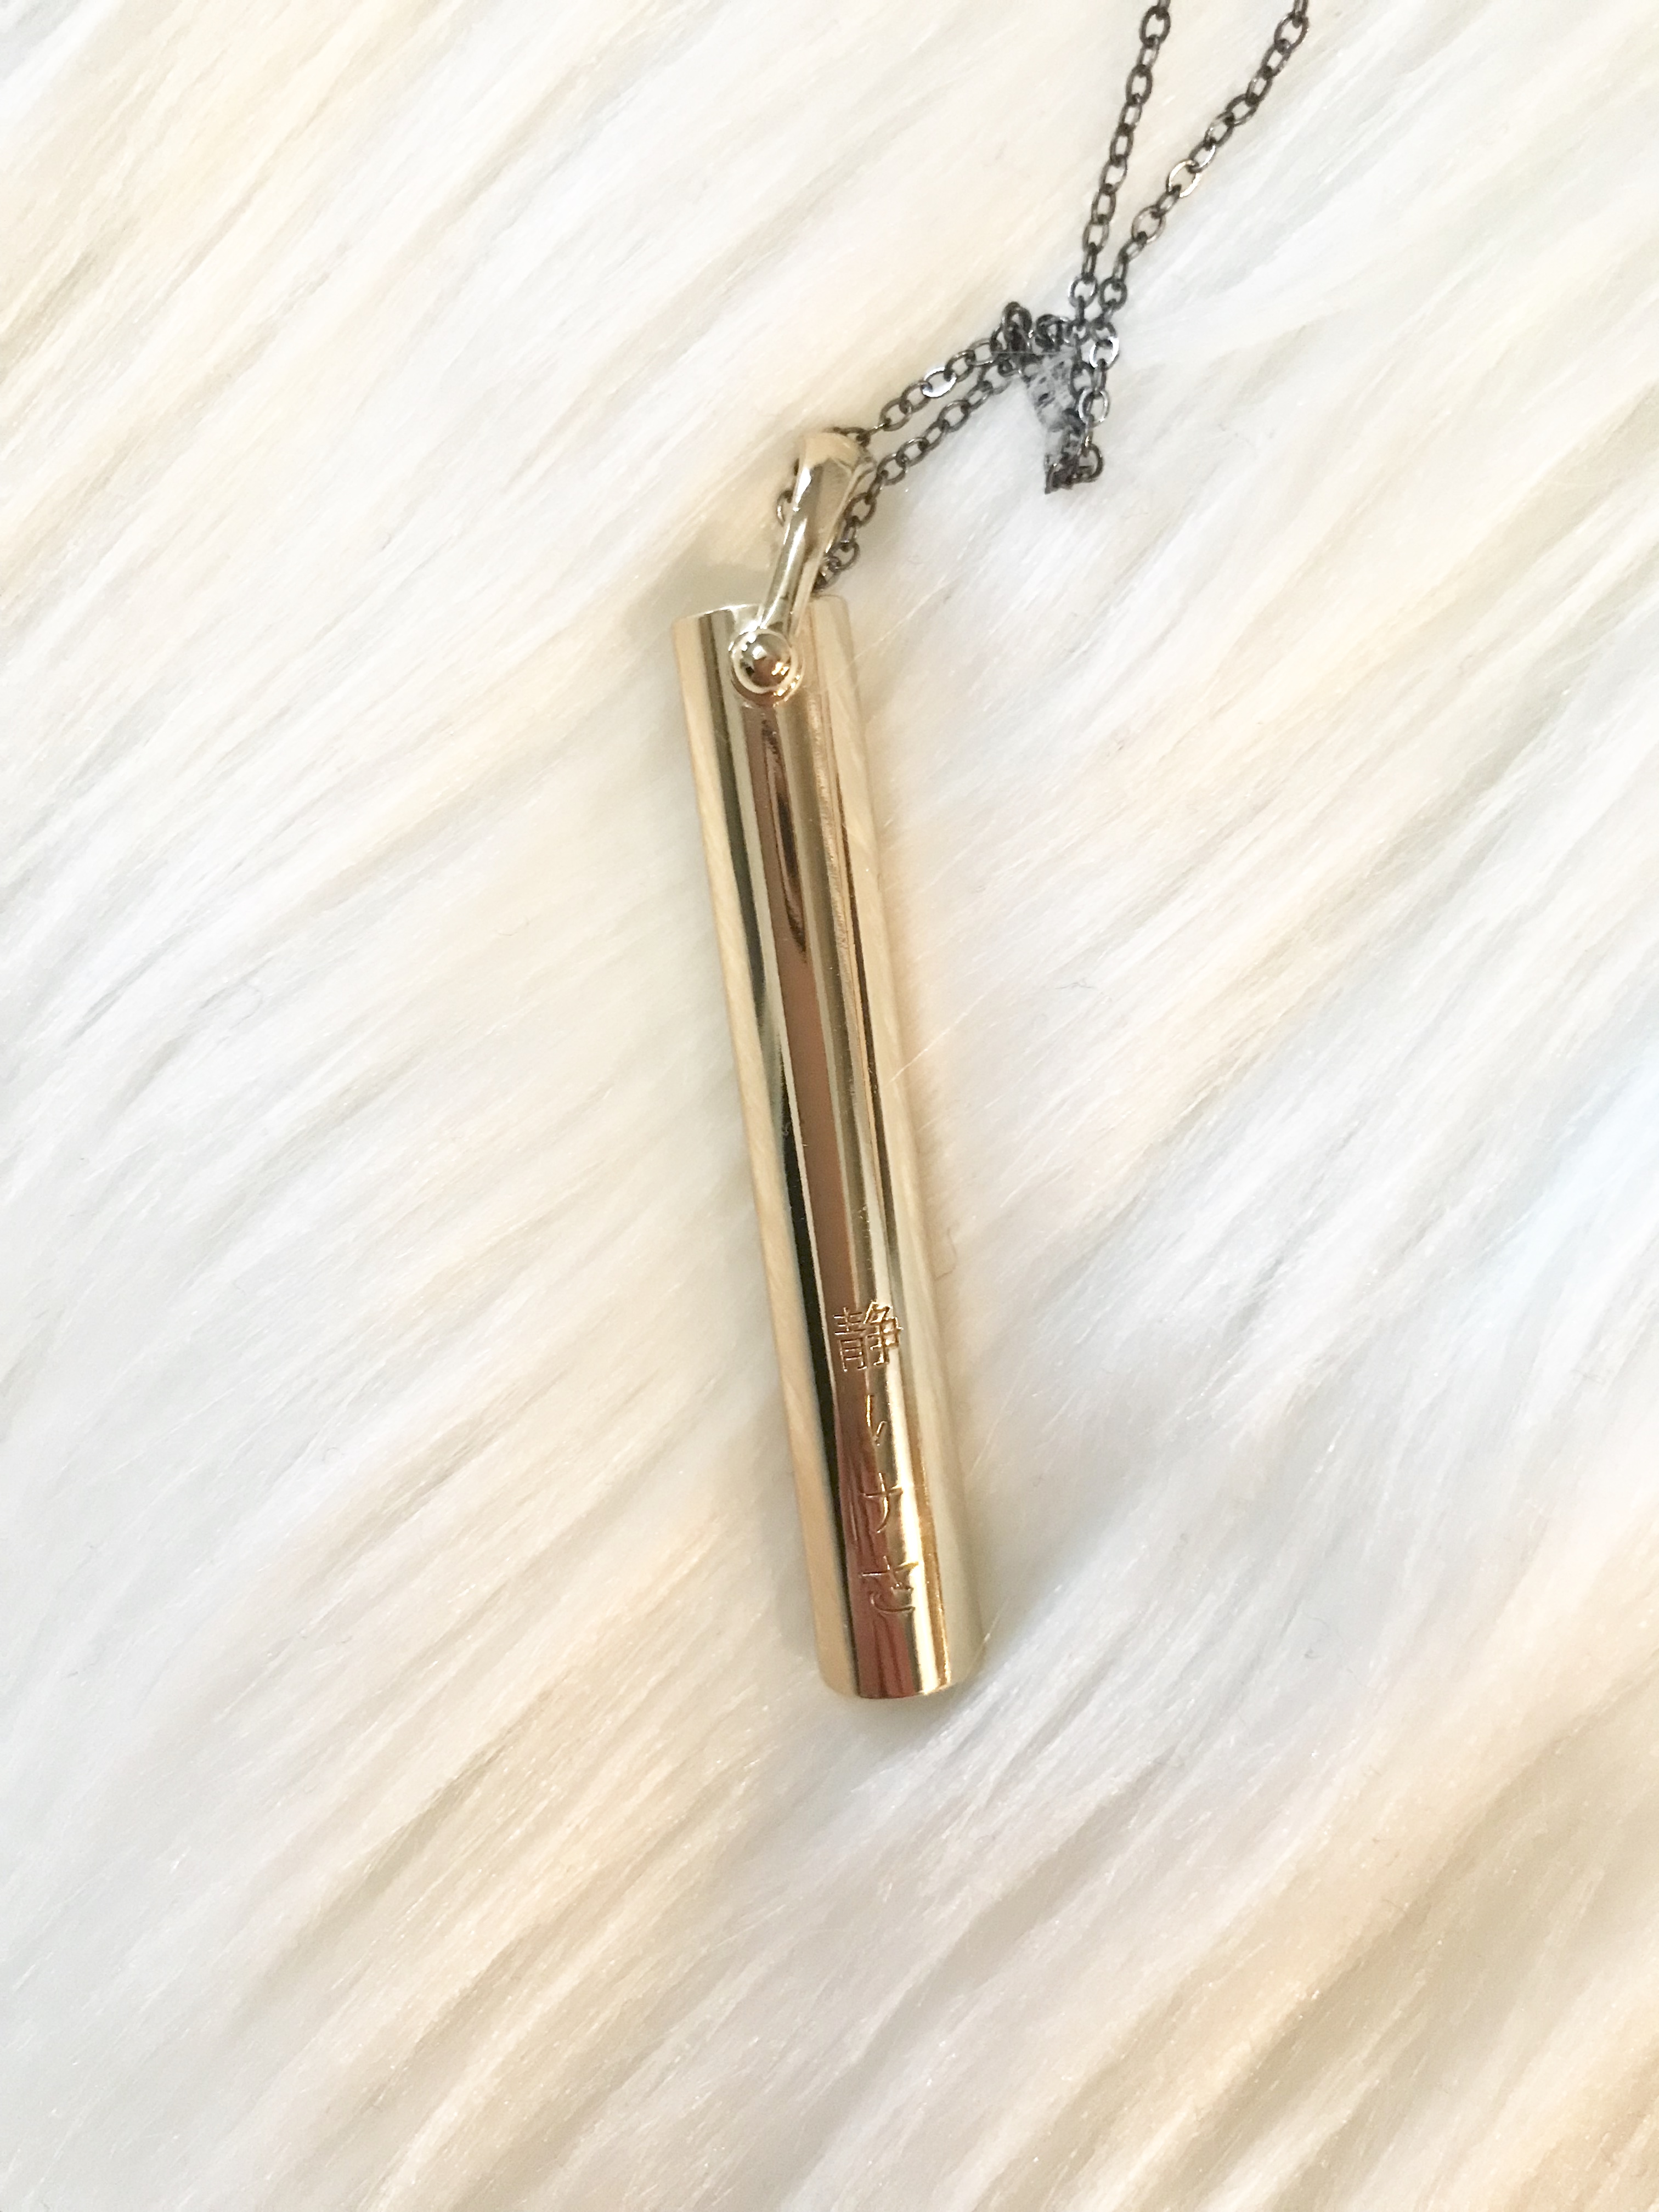 Review: Komuso Design The Shift necklace